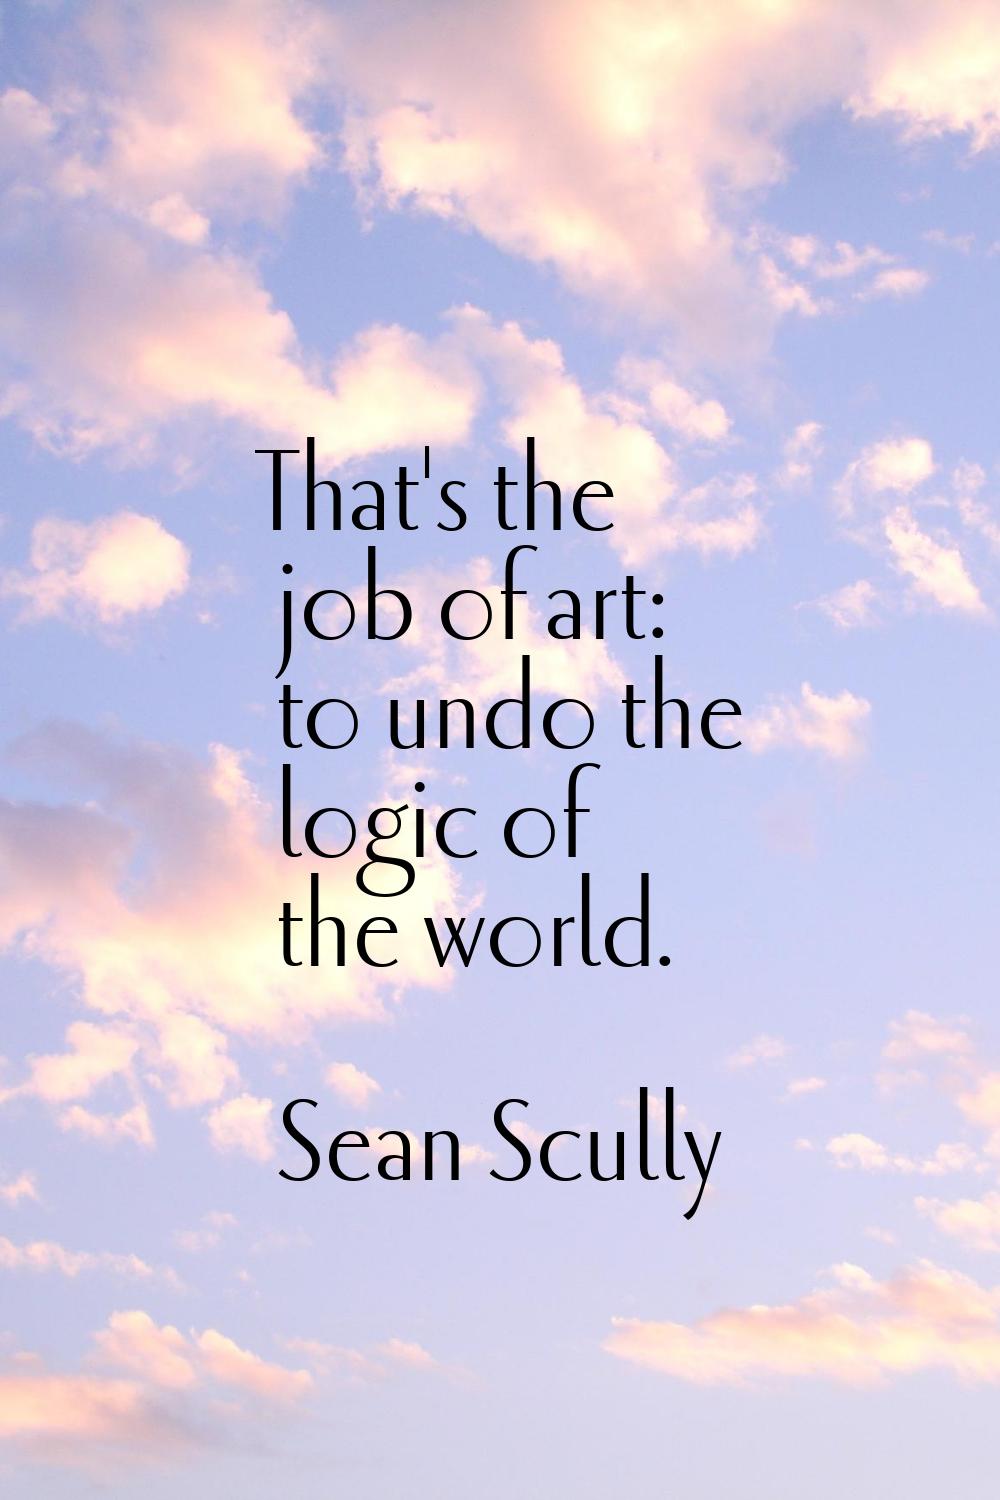 That's the job of art: to undo the logic of the world.